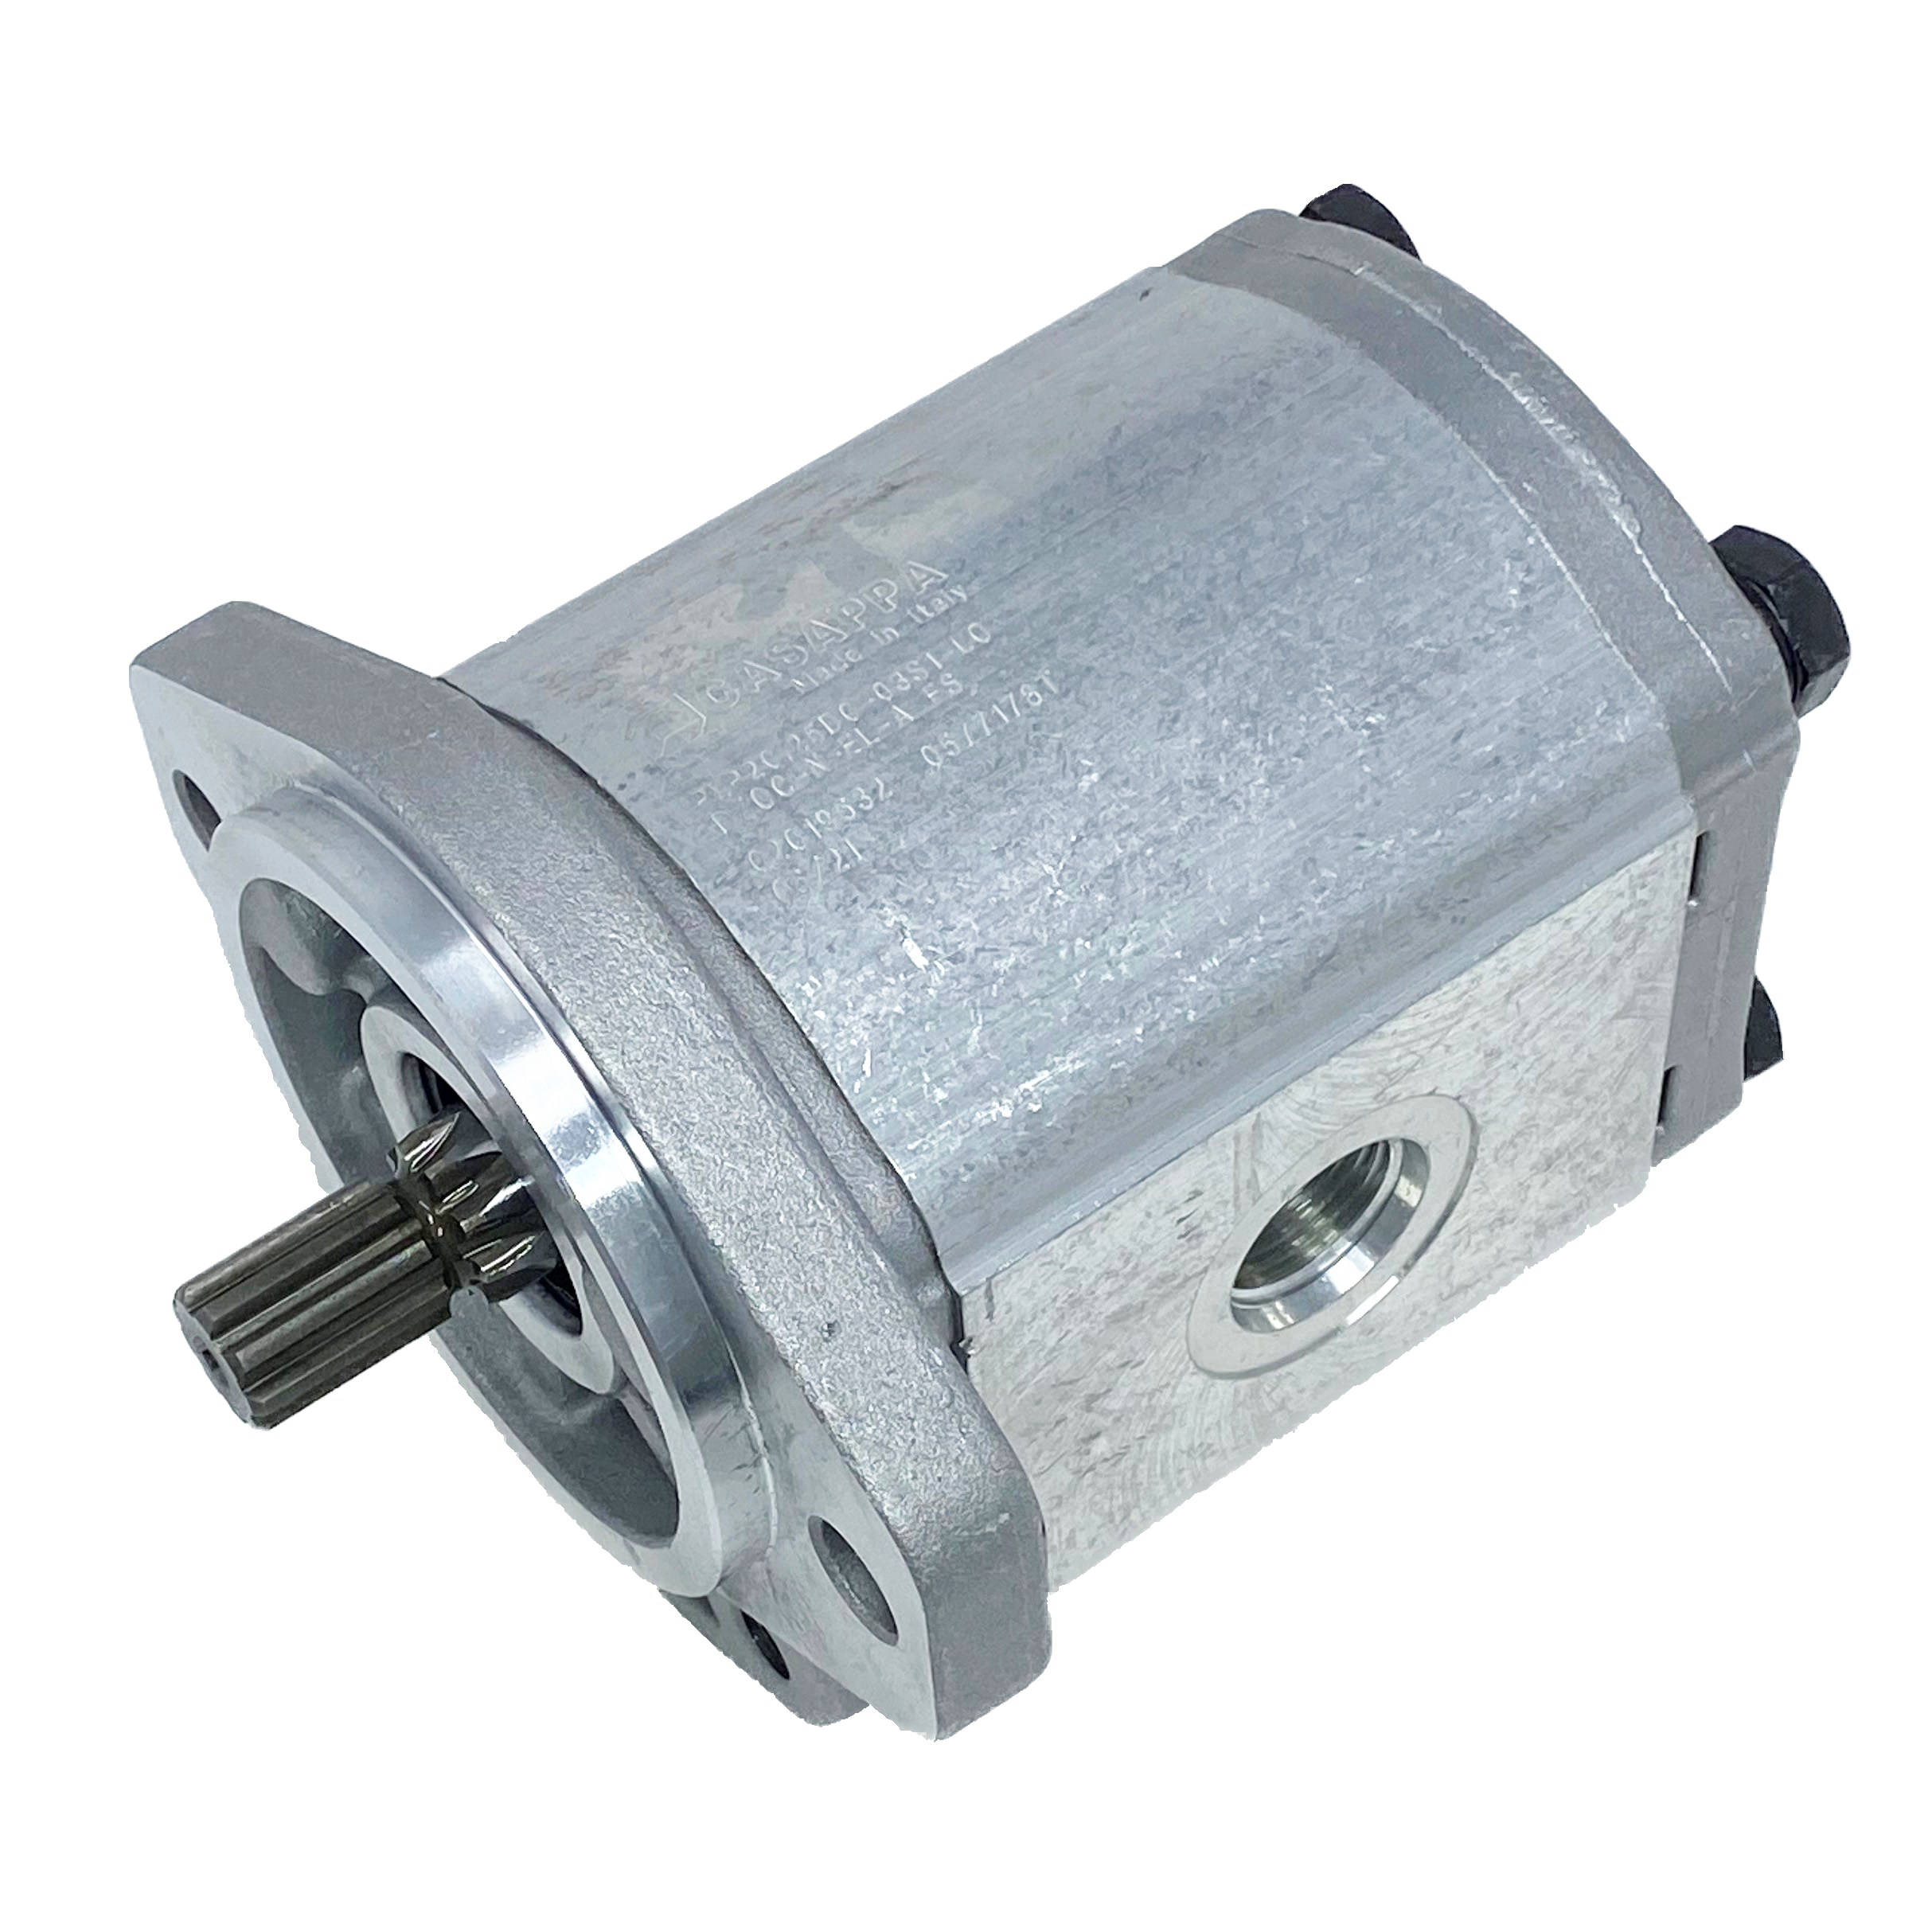 PHM20.31,5B0-07S9-LOC/OG-N-EL : Casappa Polaris Gear Motor, 33.03cc, 2900psi Rated, 2500RPM, Reversible Interior Drain, 11T 16/32dp Shaft, SAE A 2-Bolt Flange, 0.625 (5/8") #10 SAE Inlet, 1.25" #20 SAE Outlet, Cast Iron Body, Aluminum Flange